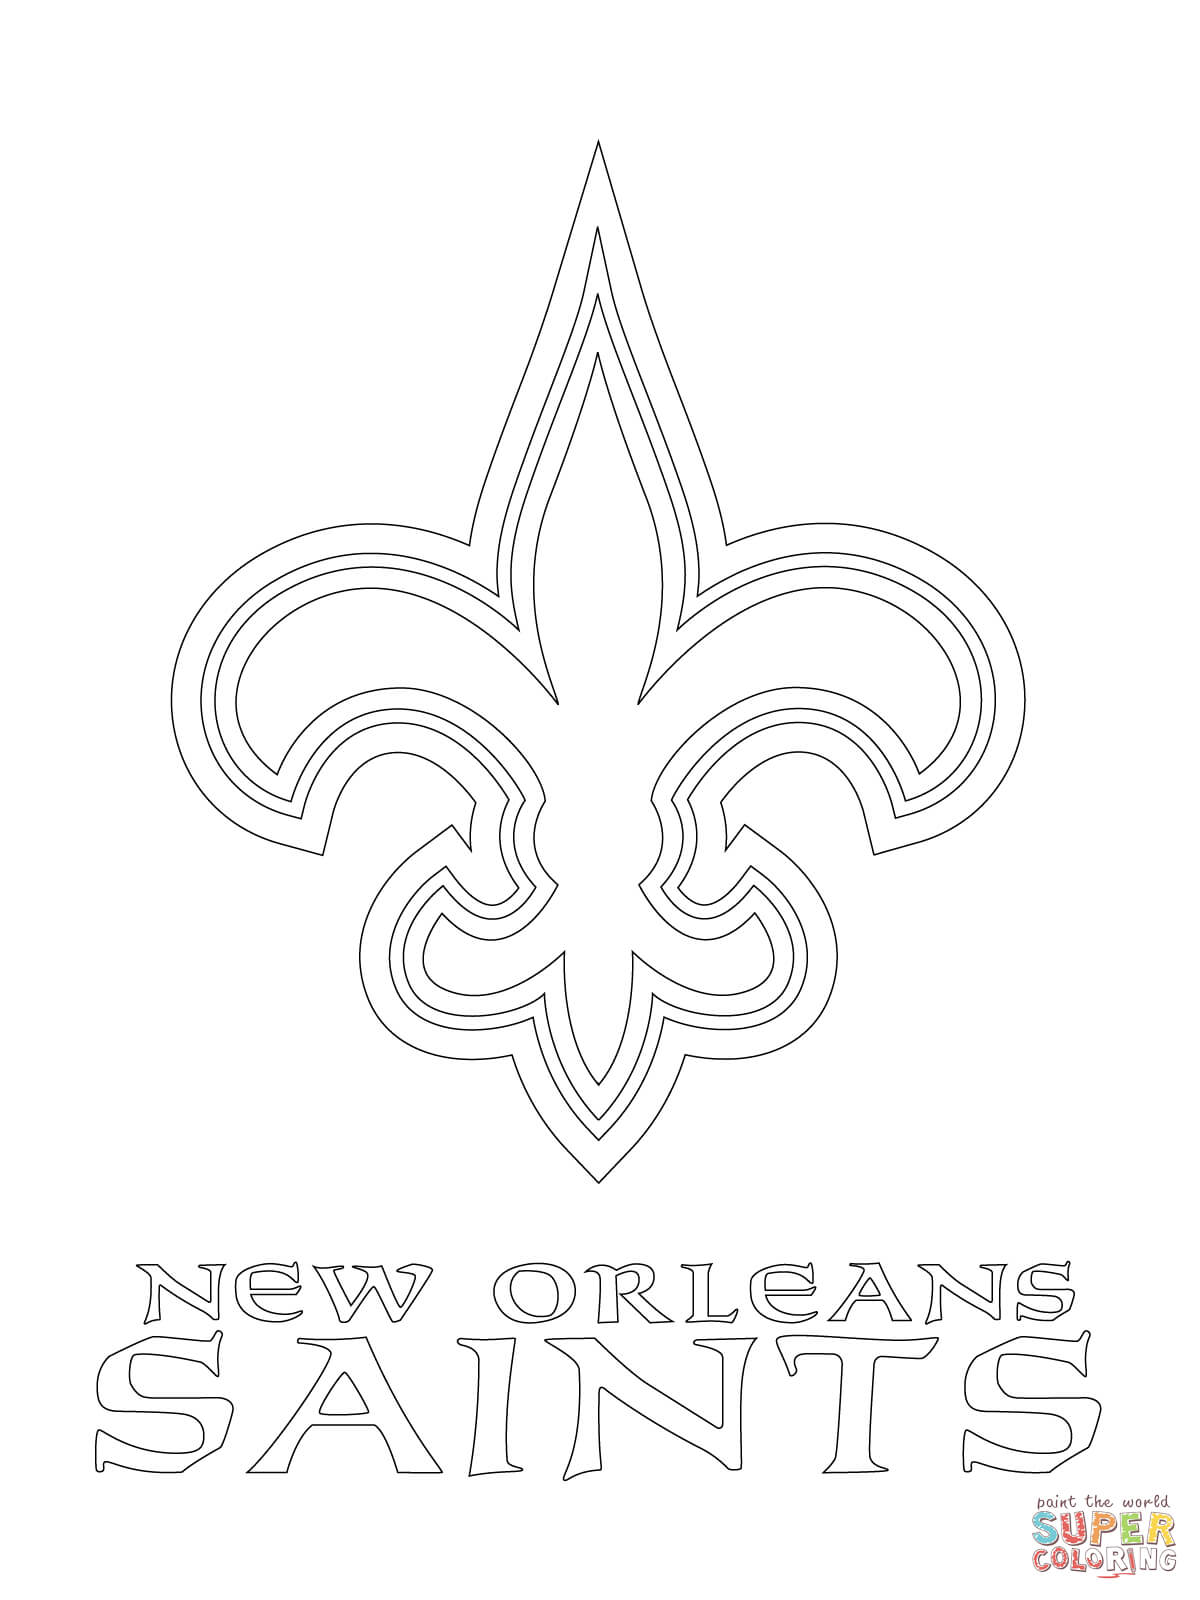 New Orleans Saints Logo coloring page | Free Printable Coloring Pages